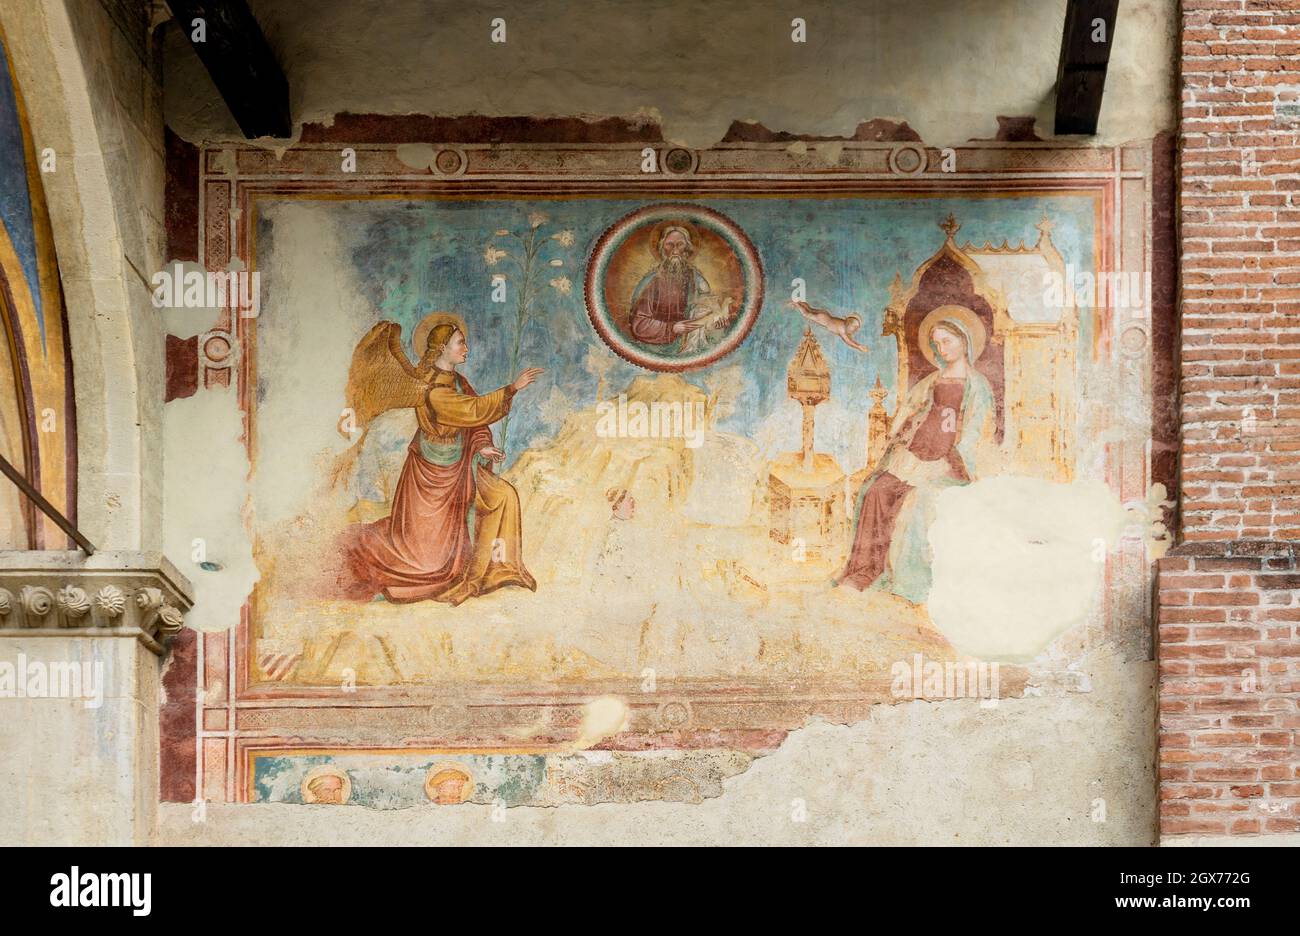 Frescoes depicting the Annunciation, on the façade of the church of San Francesco in Bassano del Grappa, province of Vicenza, Veneto region, Italy Stock Photo